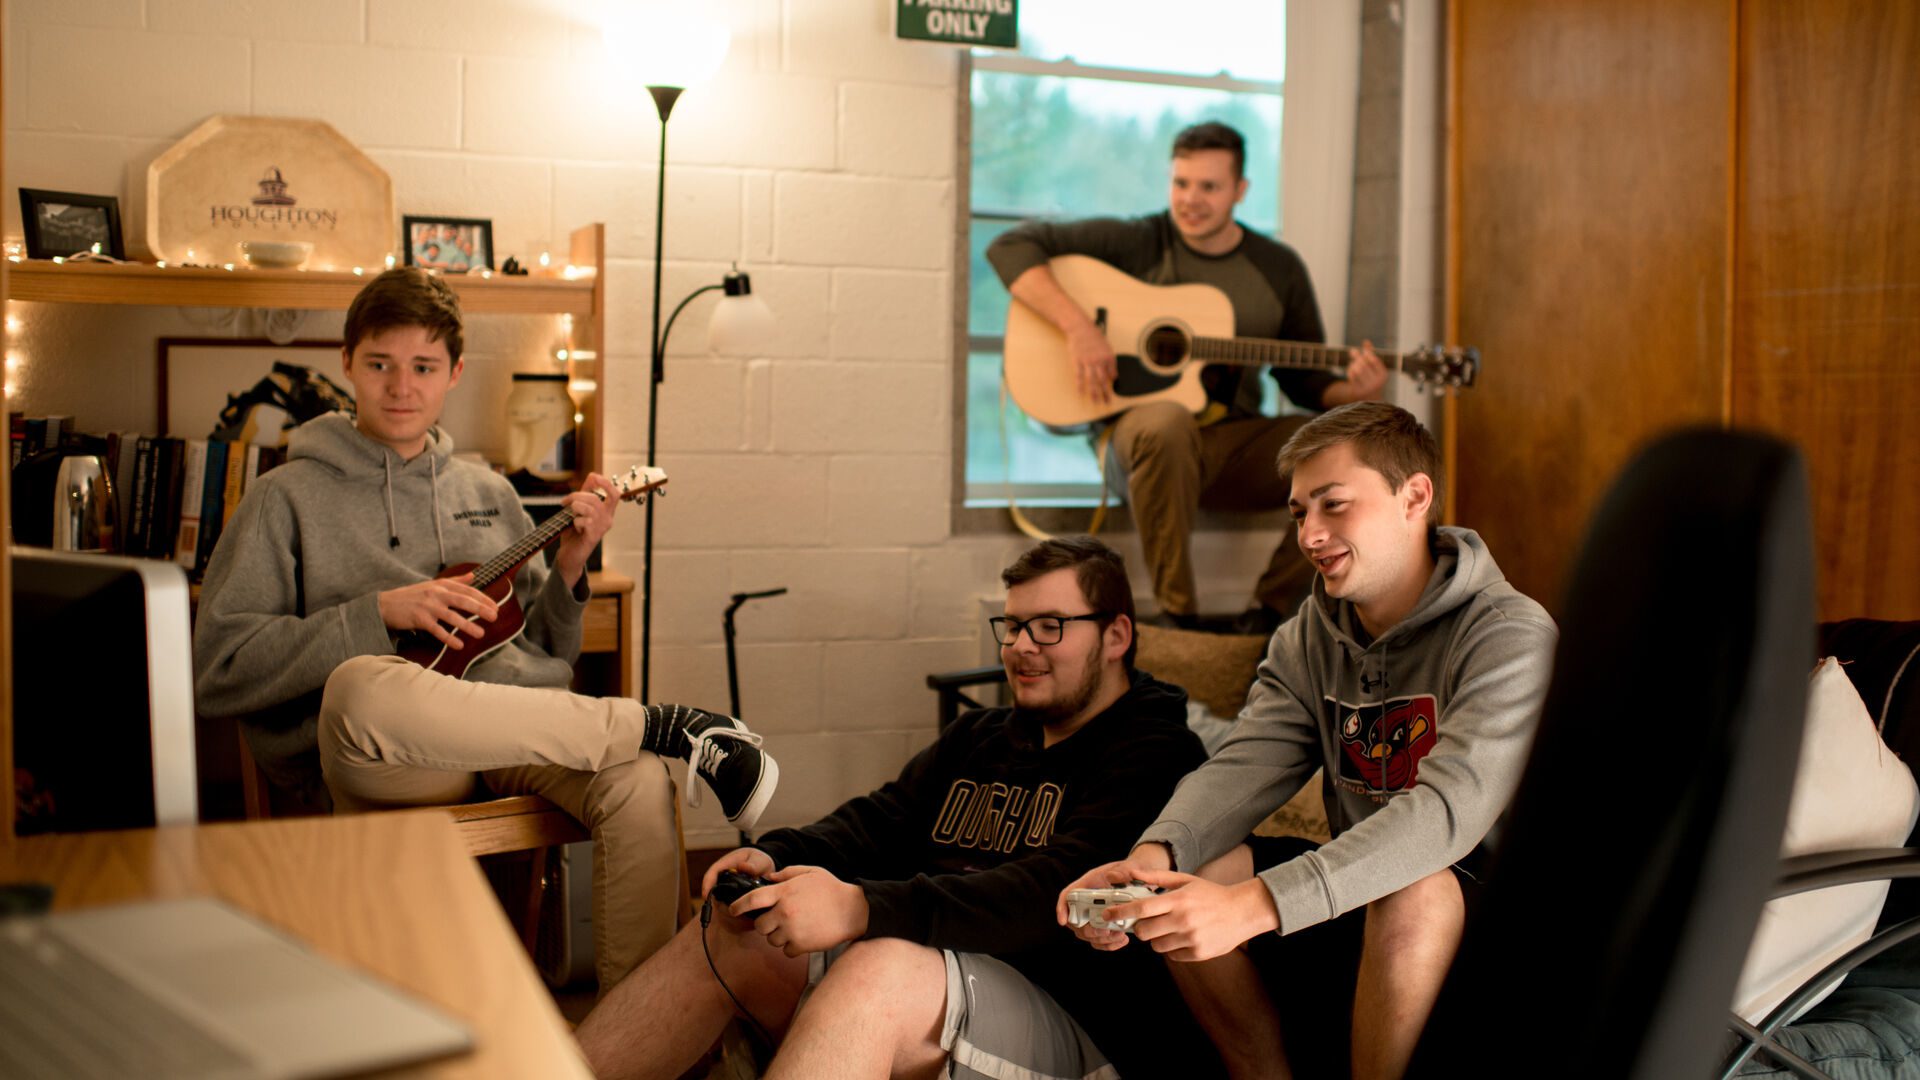 Group of Houghton students playing video games together in dorm room.